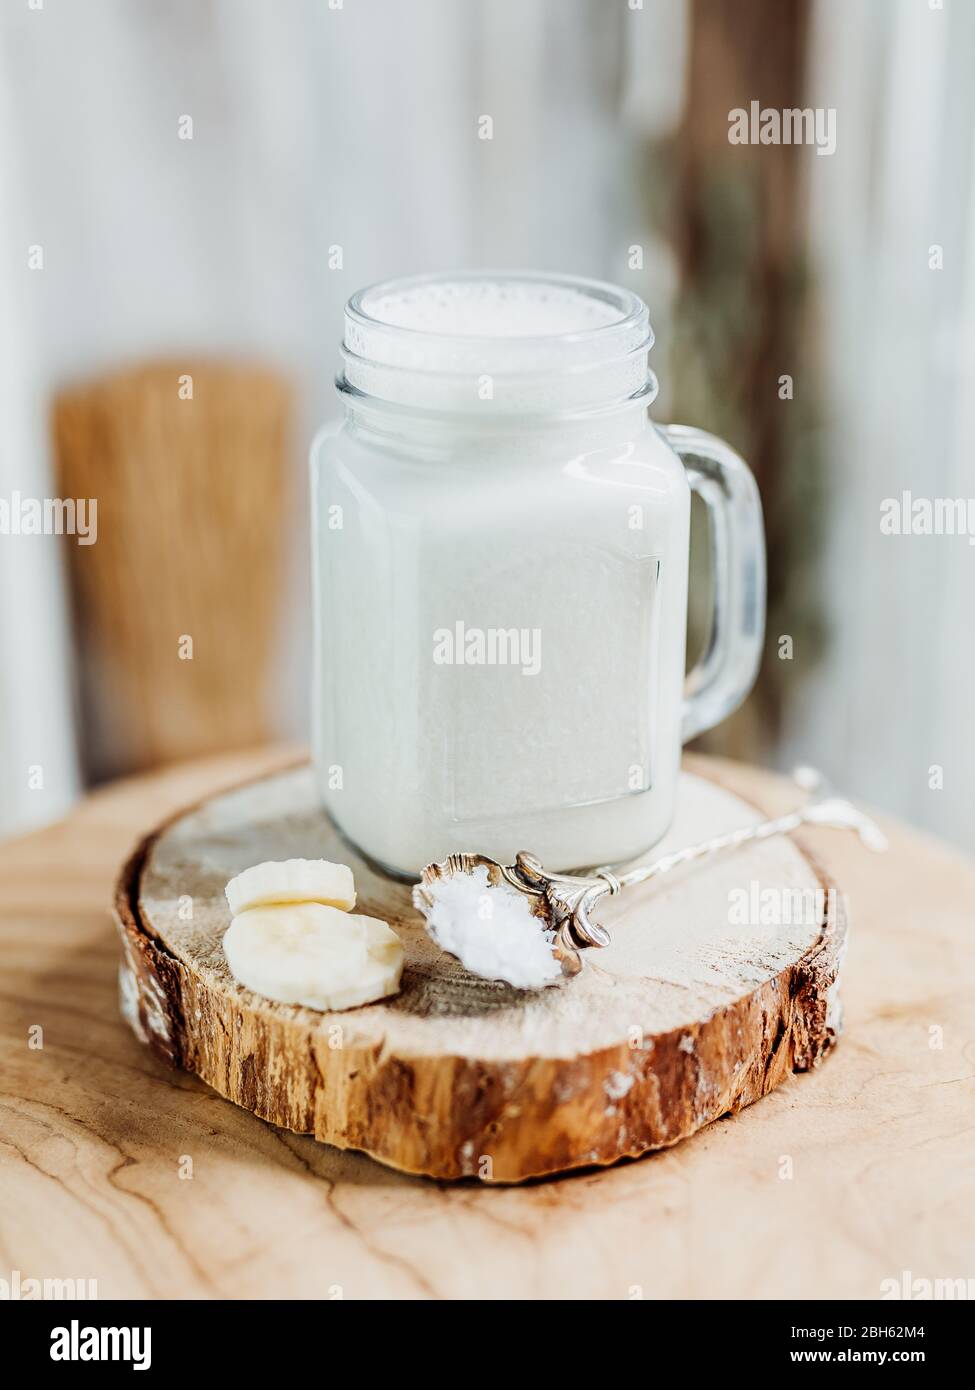 Healthy protein shake with banana, salt in a stylish glass, decorated with a banana slice and le fleur salt on a wooden plate, white, yellow, beige Stock Photo